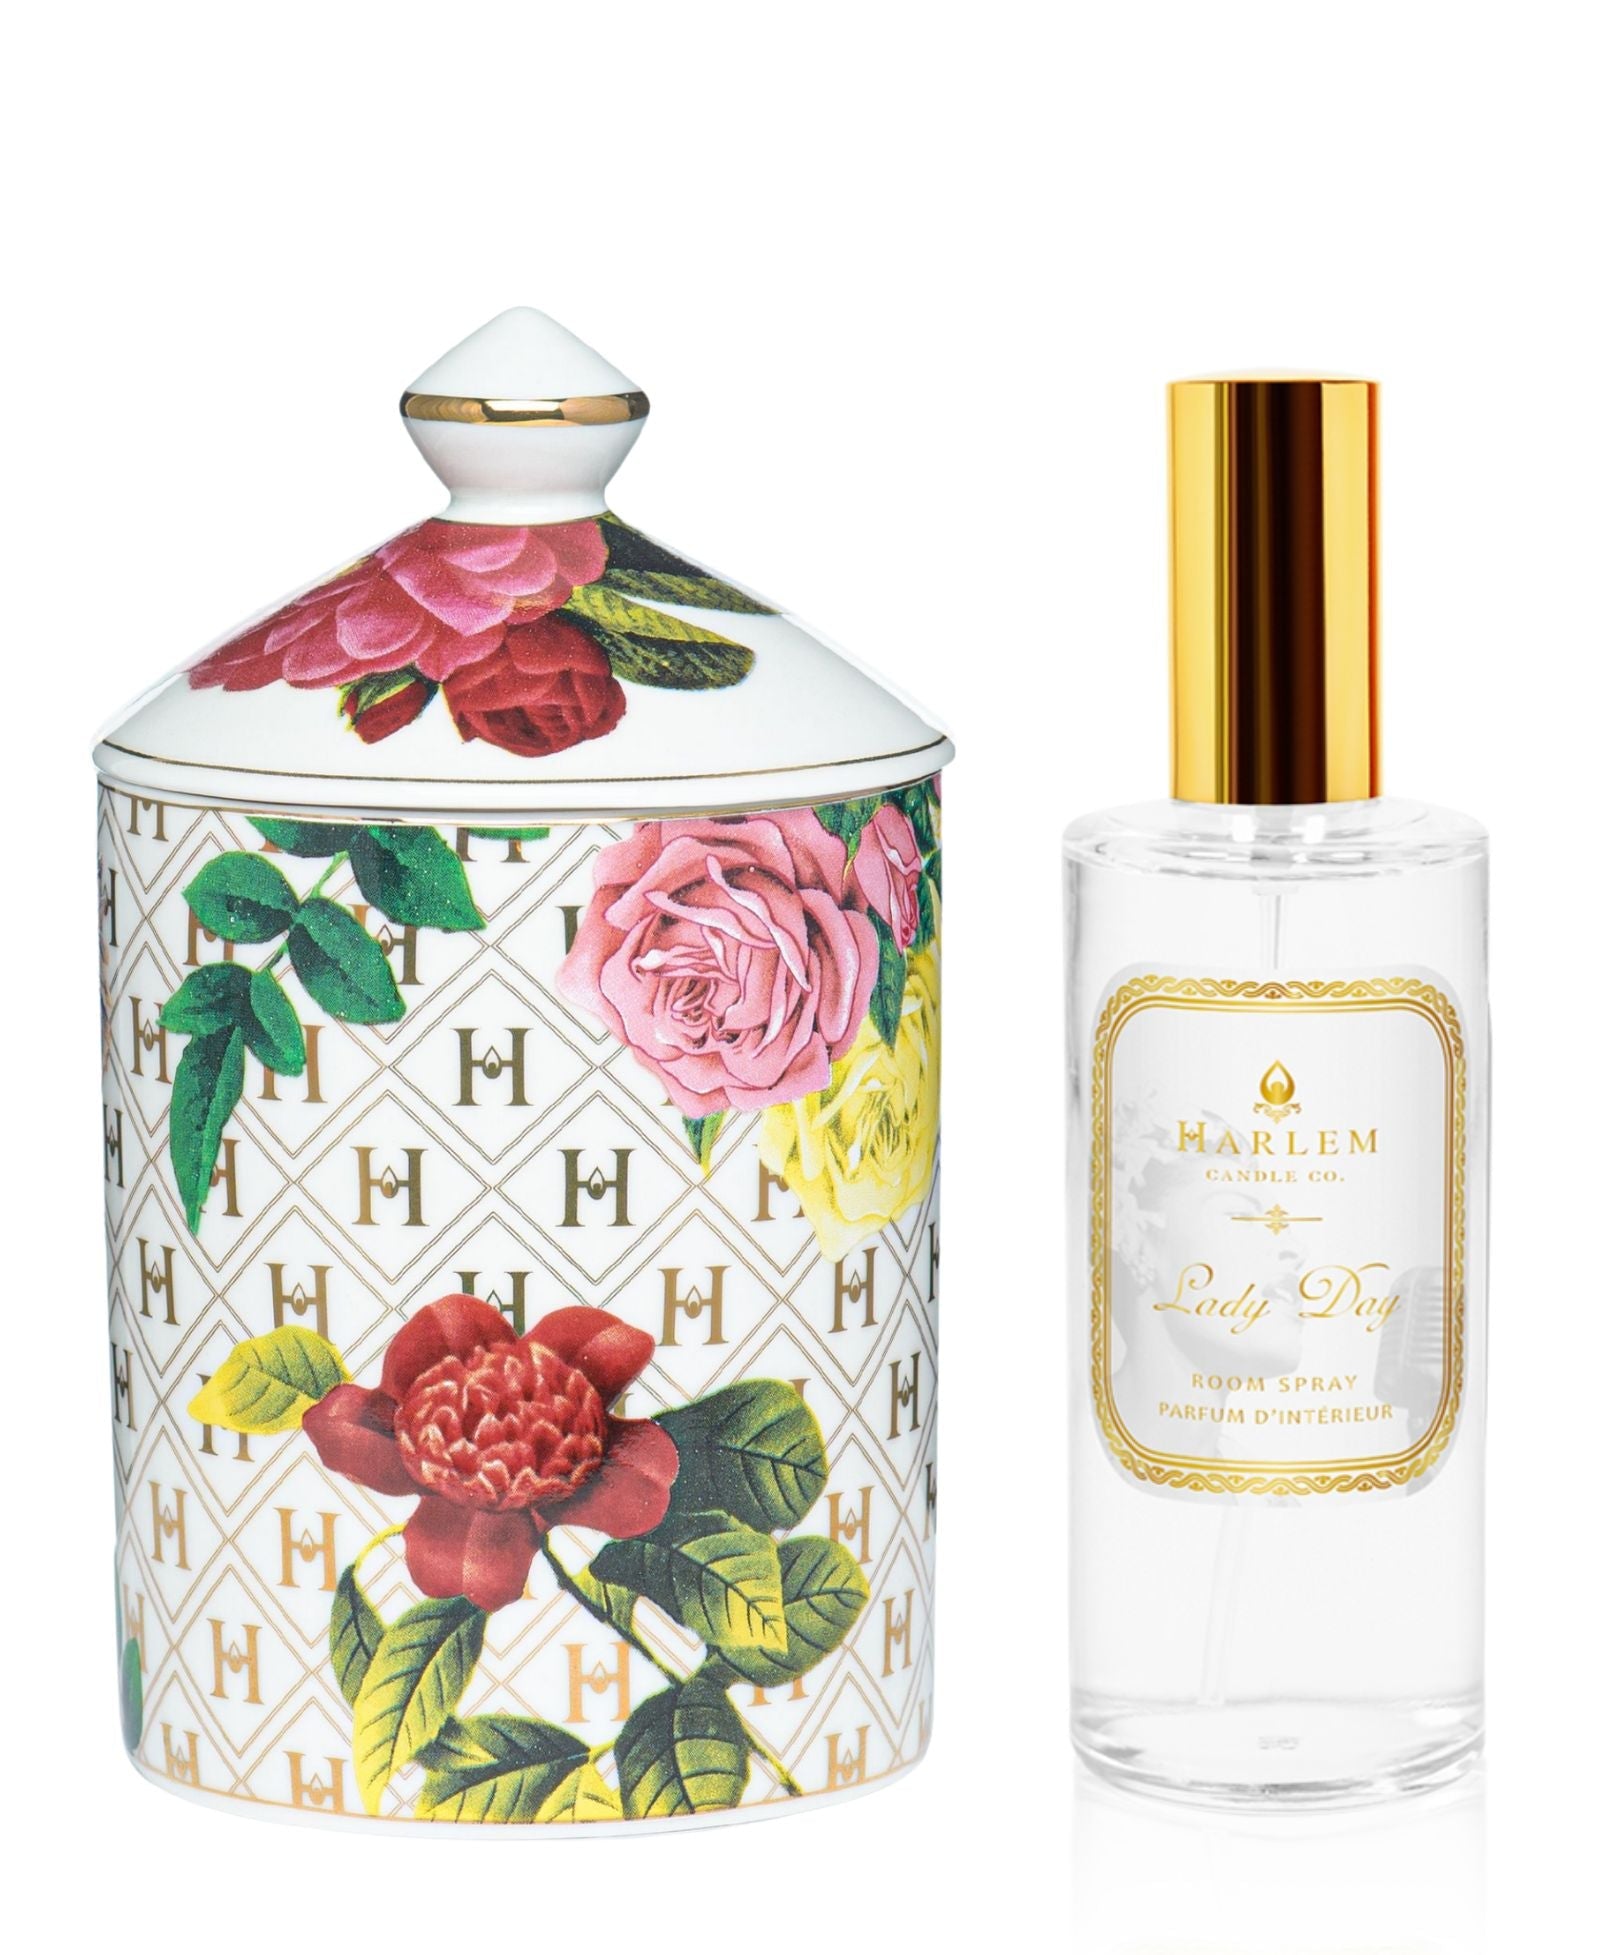 This is an image of our Lady Day Ceramic luxury candle paired with our Lady Day room and linen spray